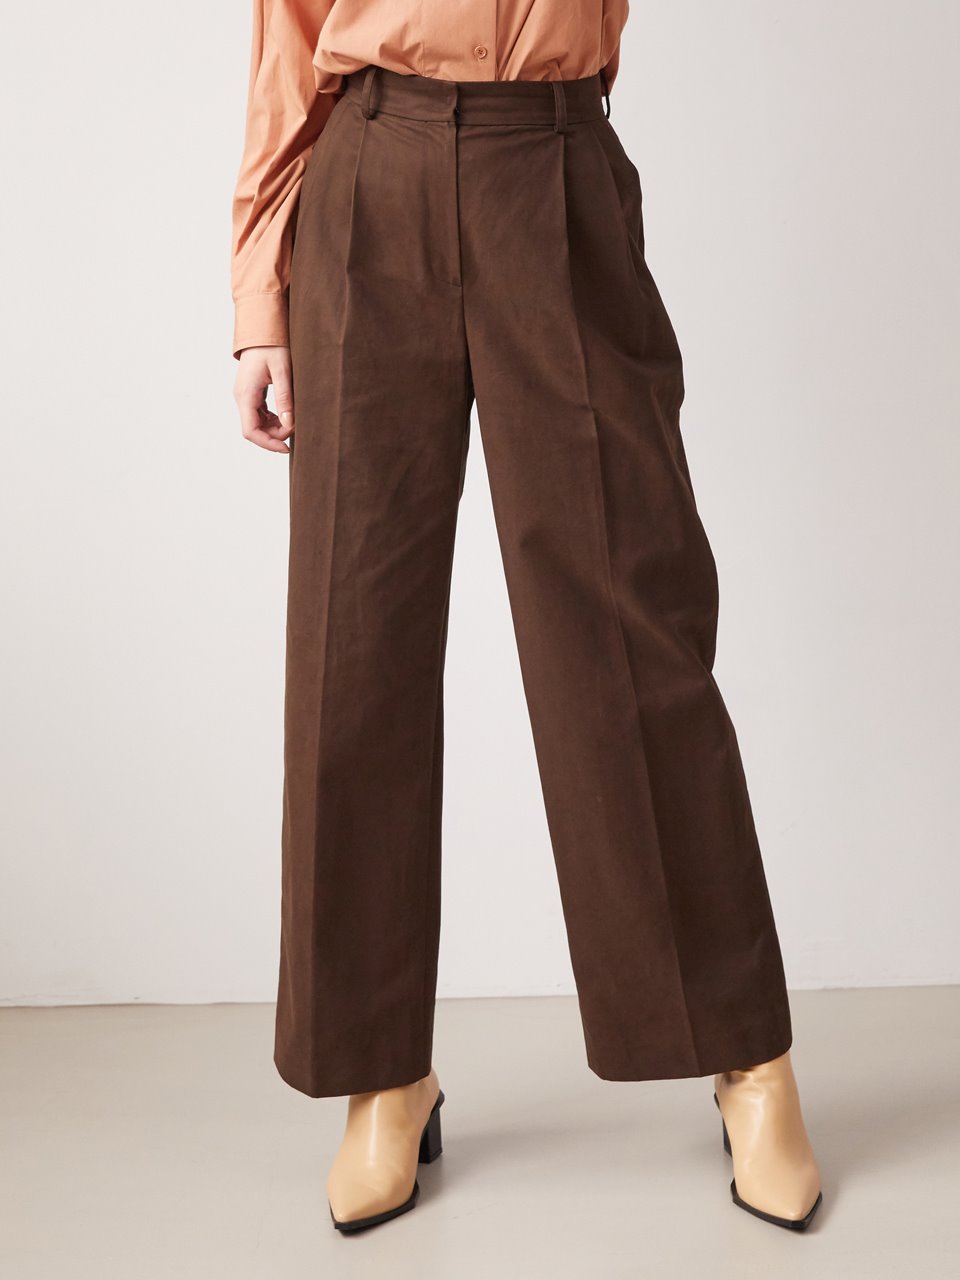 Wide cotton tuck pants - Brown